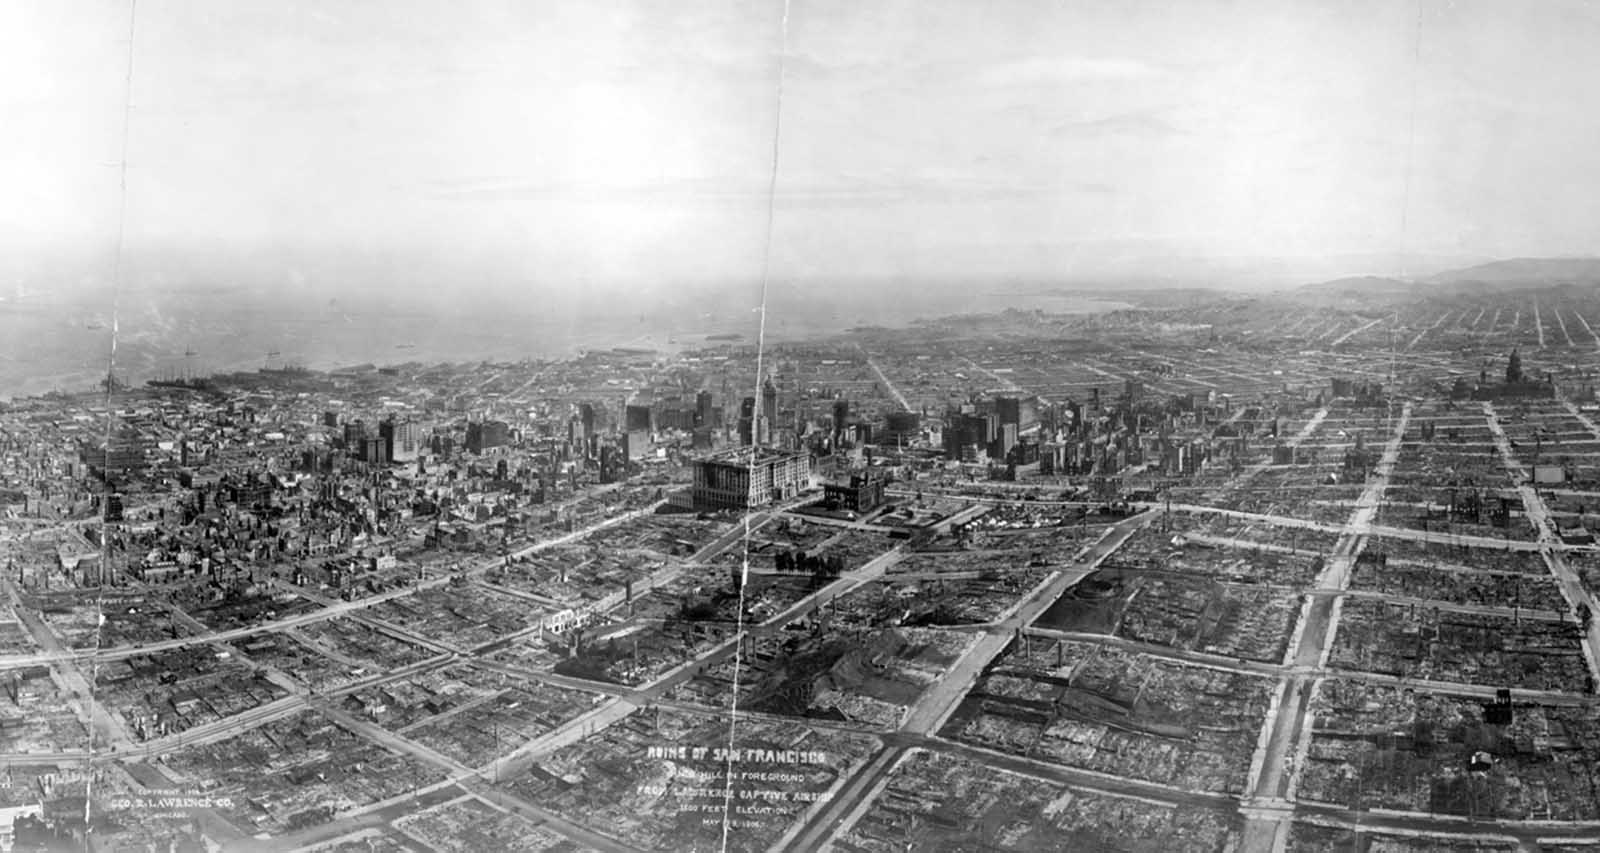 Ruins of San Francisco, Nob Hill in foreground, viewed from the Lawrence Captive Airship from a height of 1,500 feet on May 29, 1906, 41 days after the disaster.